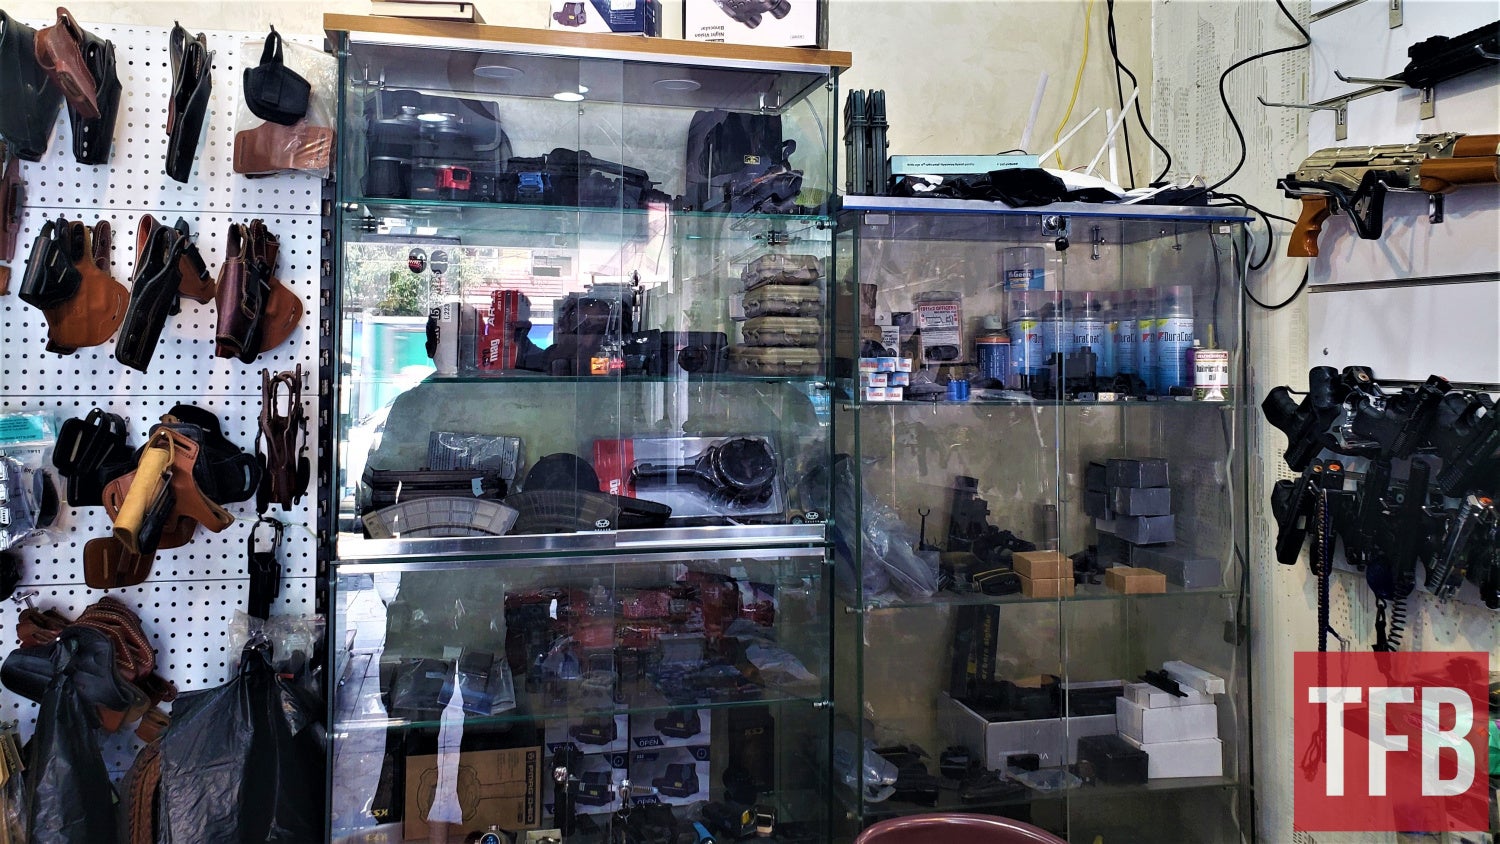 Only in Iraqi gun shop, you can see Duracoat next to an AK with gold or silver finish